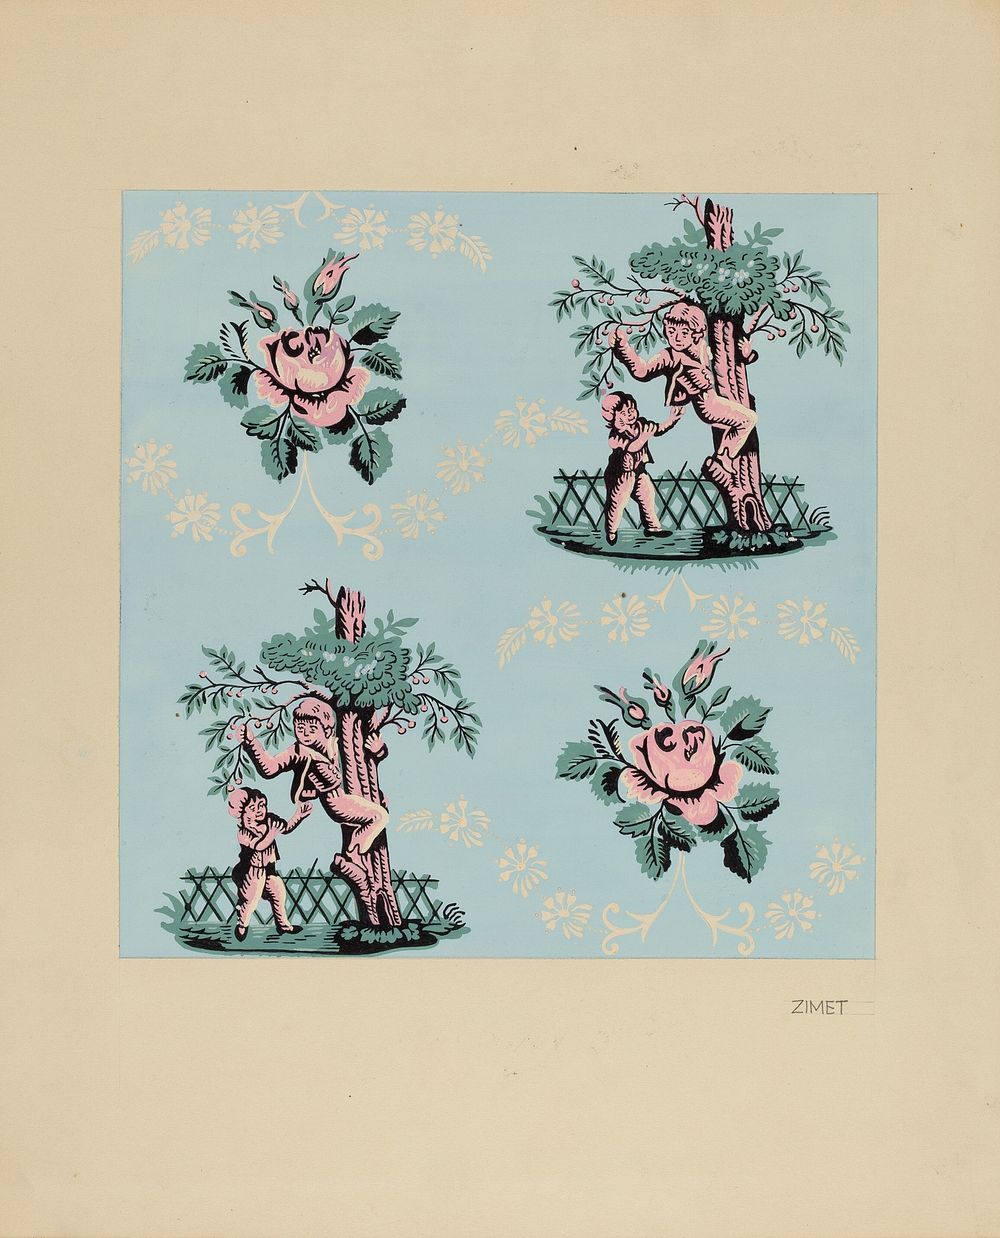 Wall Paper ("The Cherry Boy"), (c. 1937) by A. Zimet.  